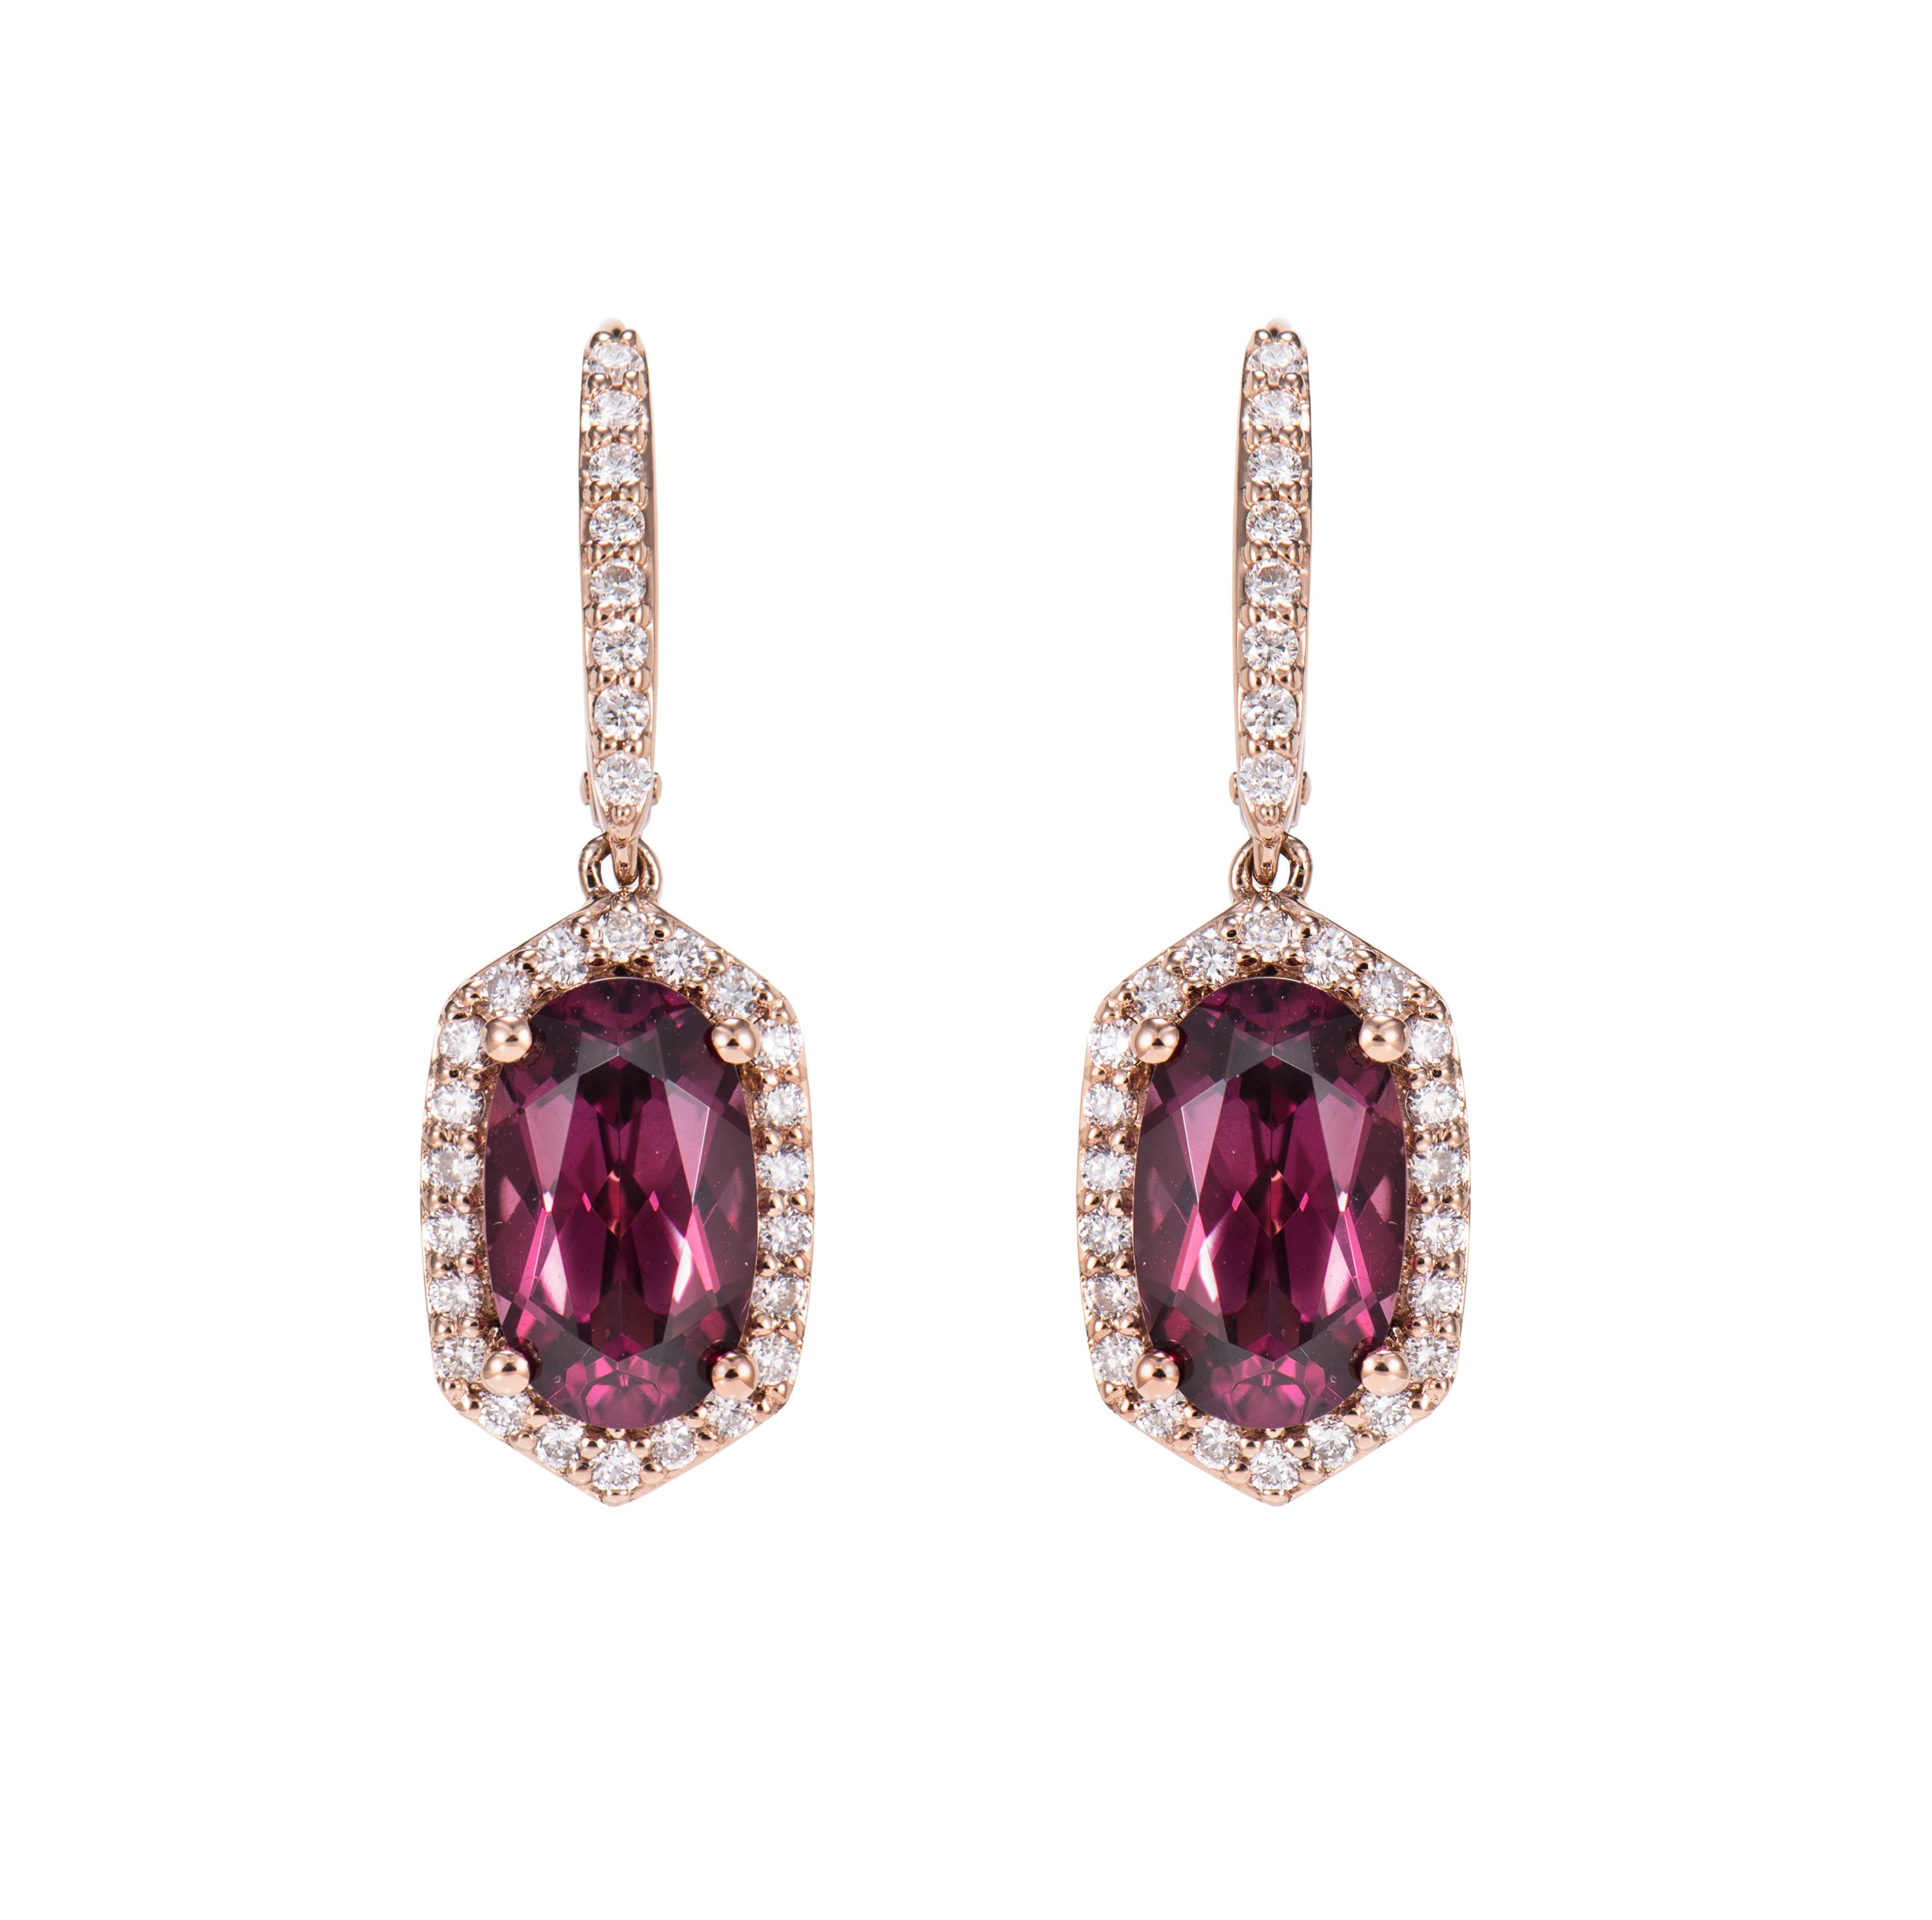 Contemporary 4.74 Carat Rhodolite Drop Earring in 18Karat Rose Gold with White Diamond. For Sale